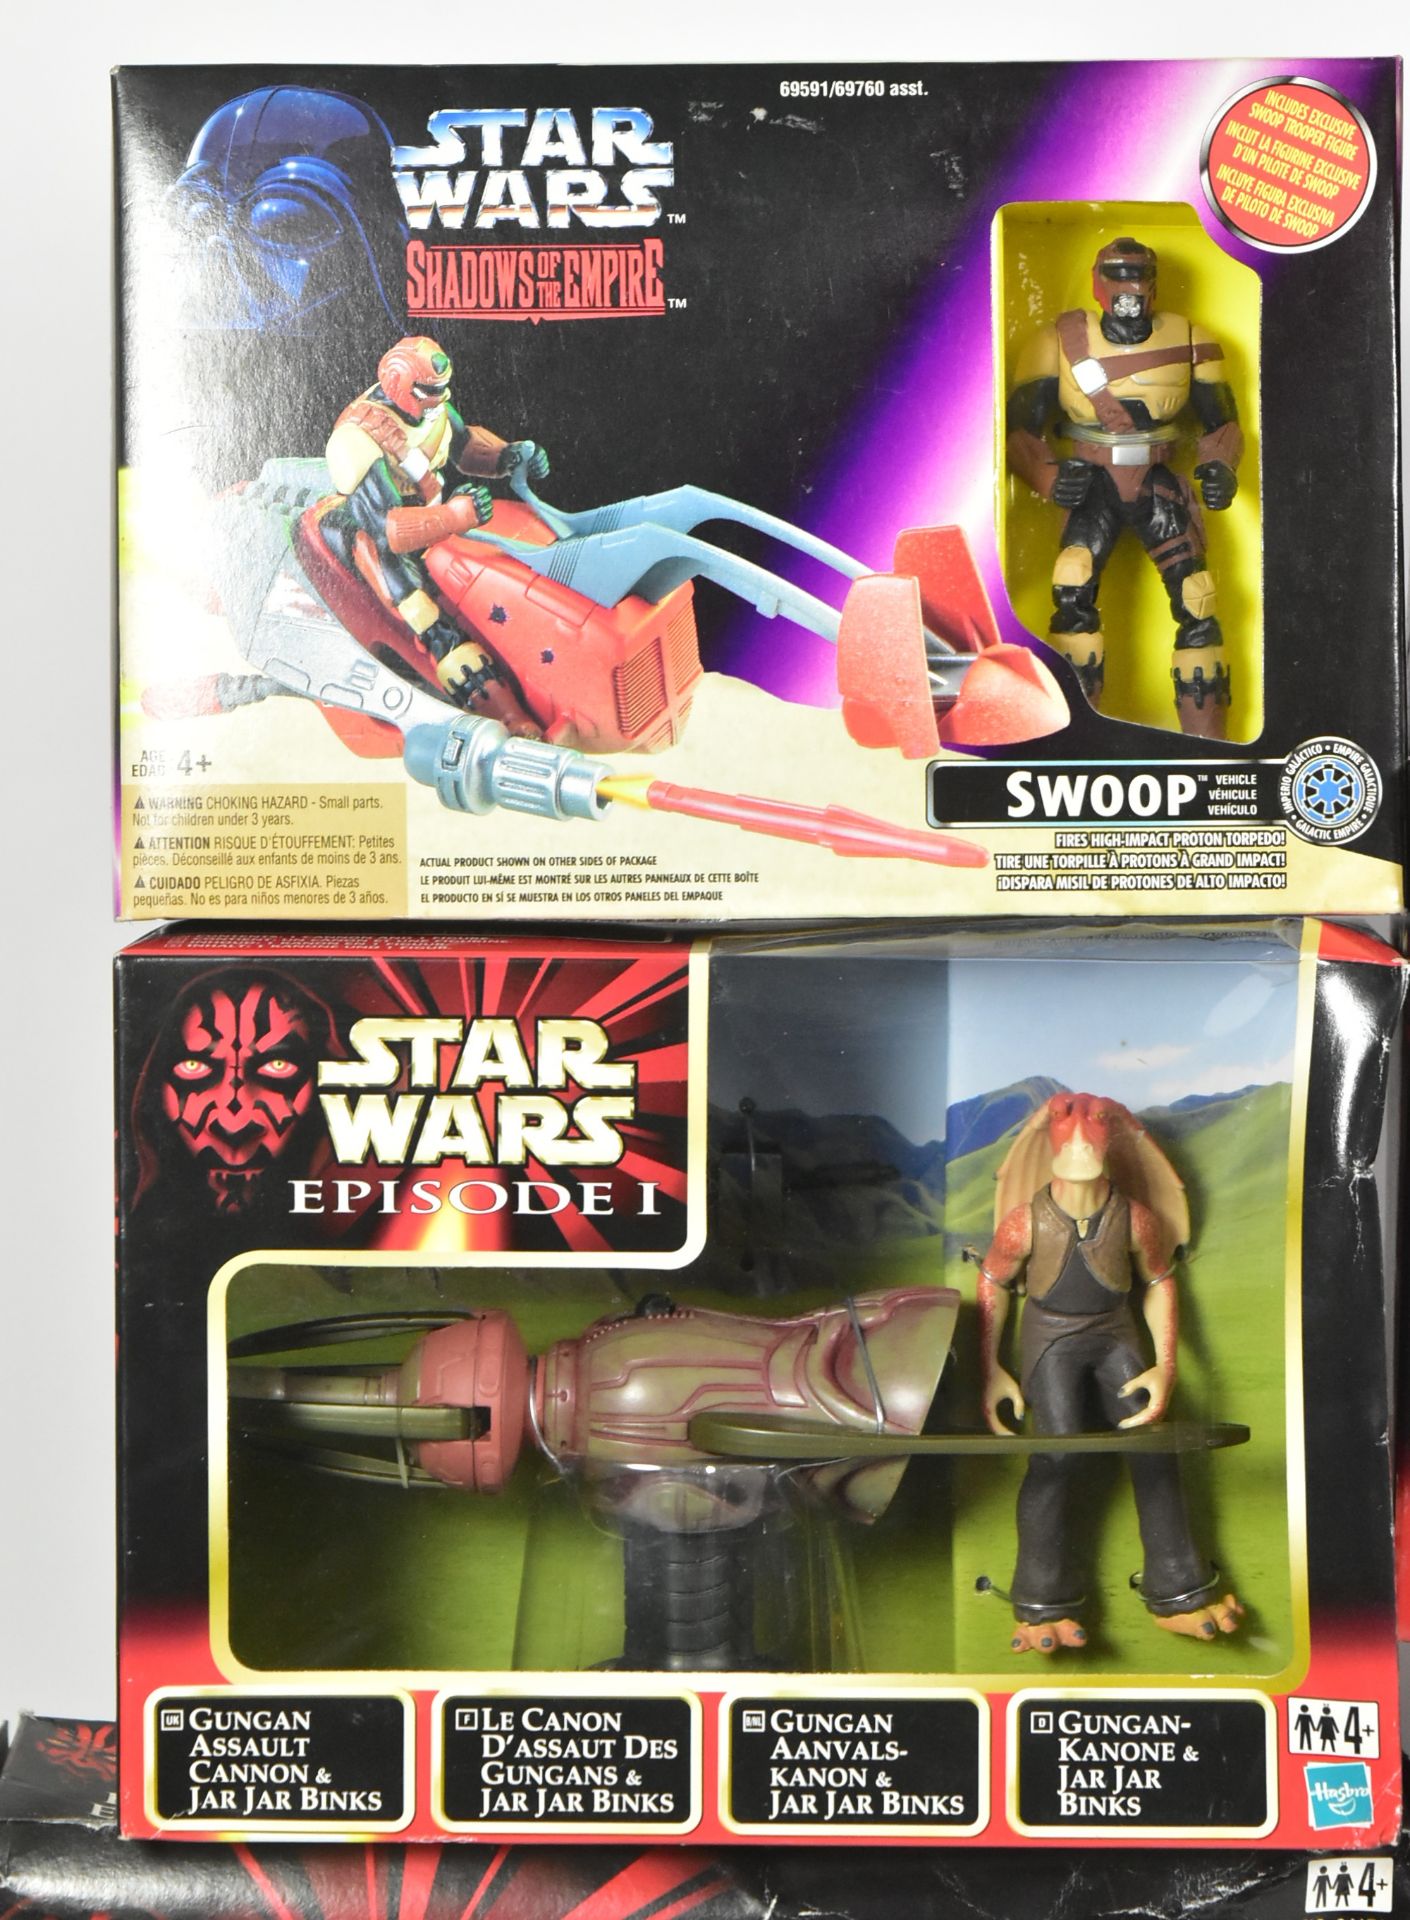 STAR WARS - EPISODE I - HASBRO BOXED ACTION FIGURE PLAYSETS - Image 5 of 6